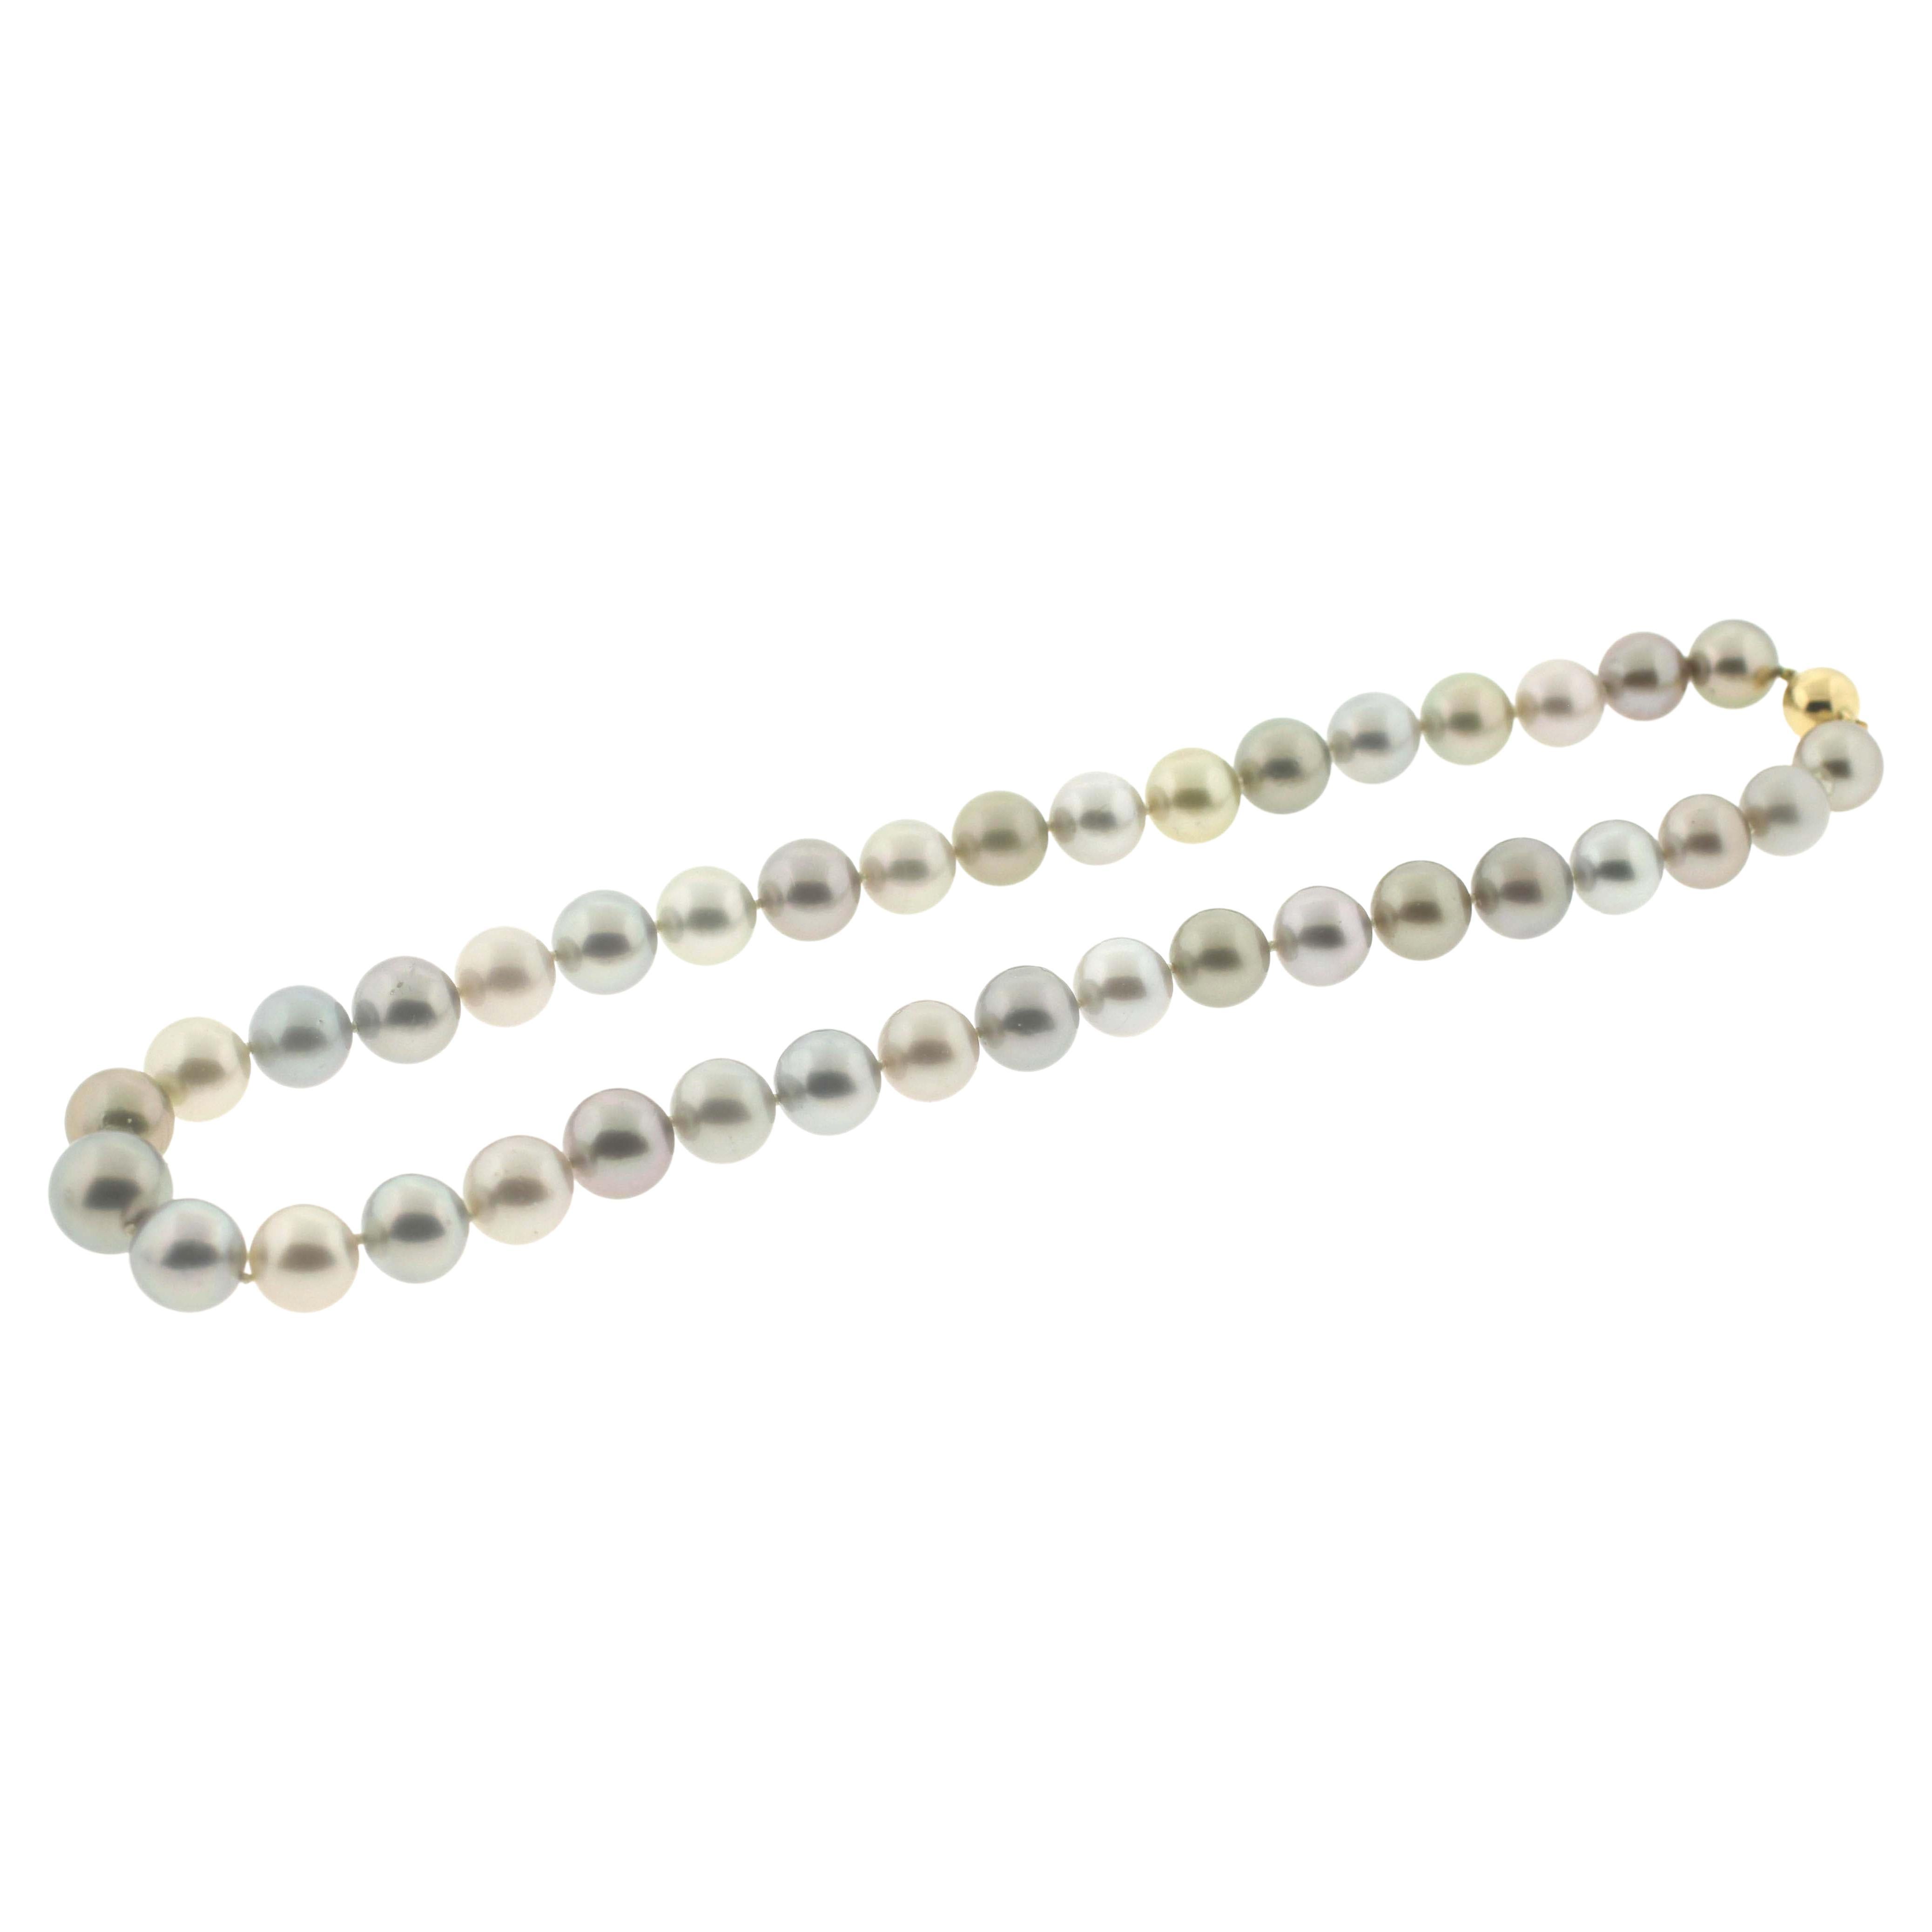 Hakimoto By Jewel Of Ocean 18K Tahitian Pastel Fancy Color Strand Necklace
18K Yellow Gold And Diamonds Clasp 
Weight (g): 69.7
Cultured Tahitian South Sea Pearl 
Pearl Size: 12X9mm 
Pearl Shape: Round 
Body color: Pastel
Orient: Good
Luster: Good